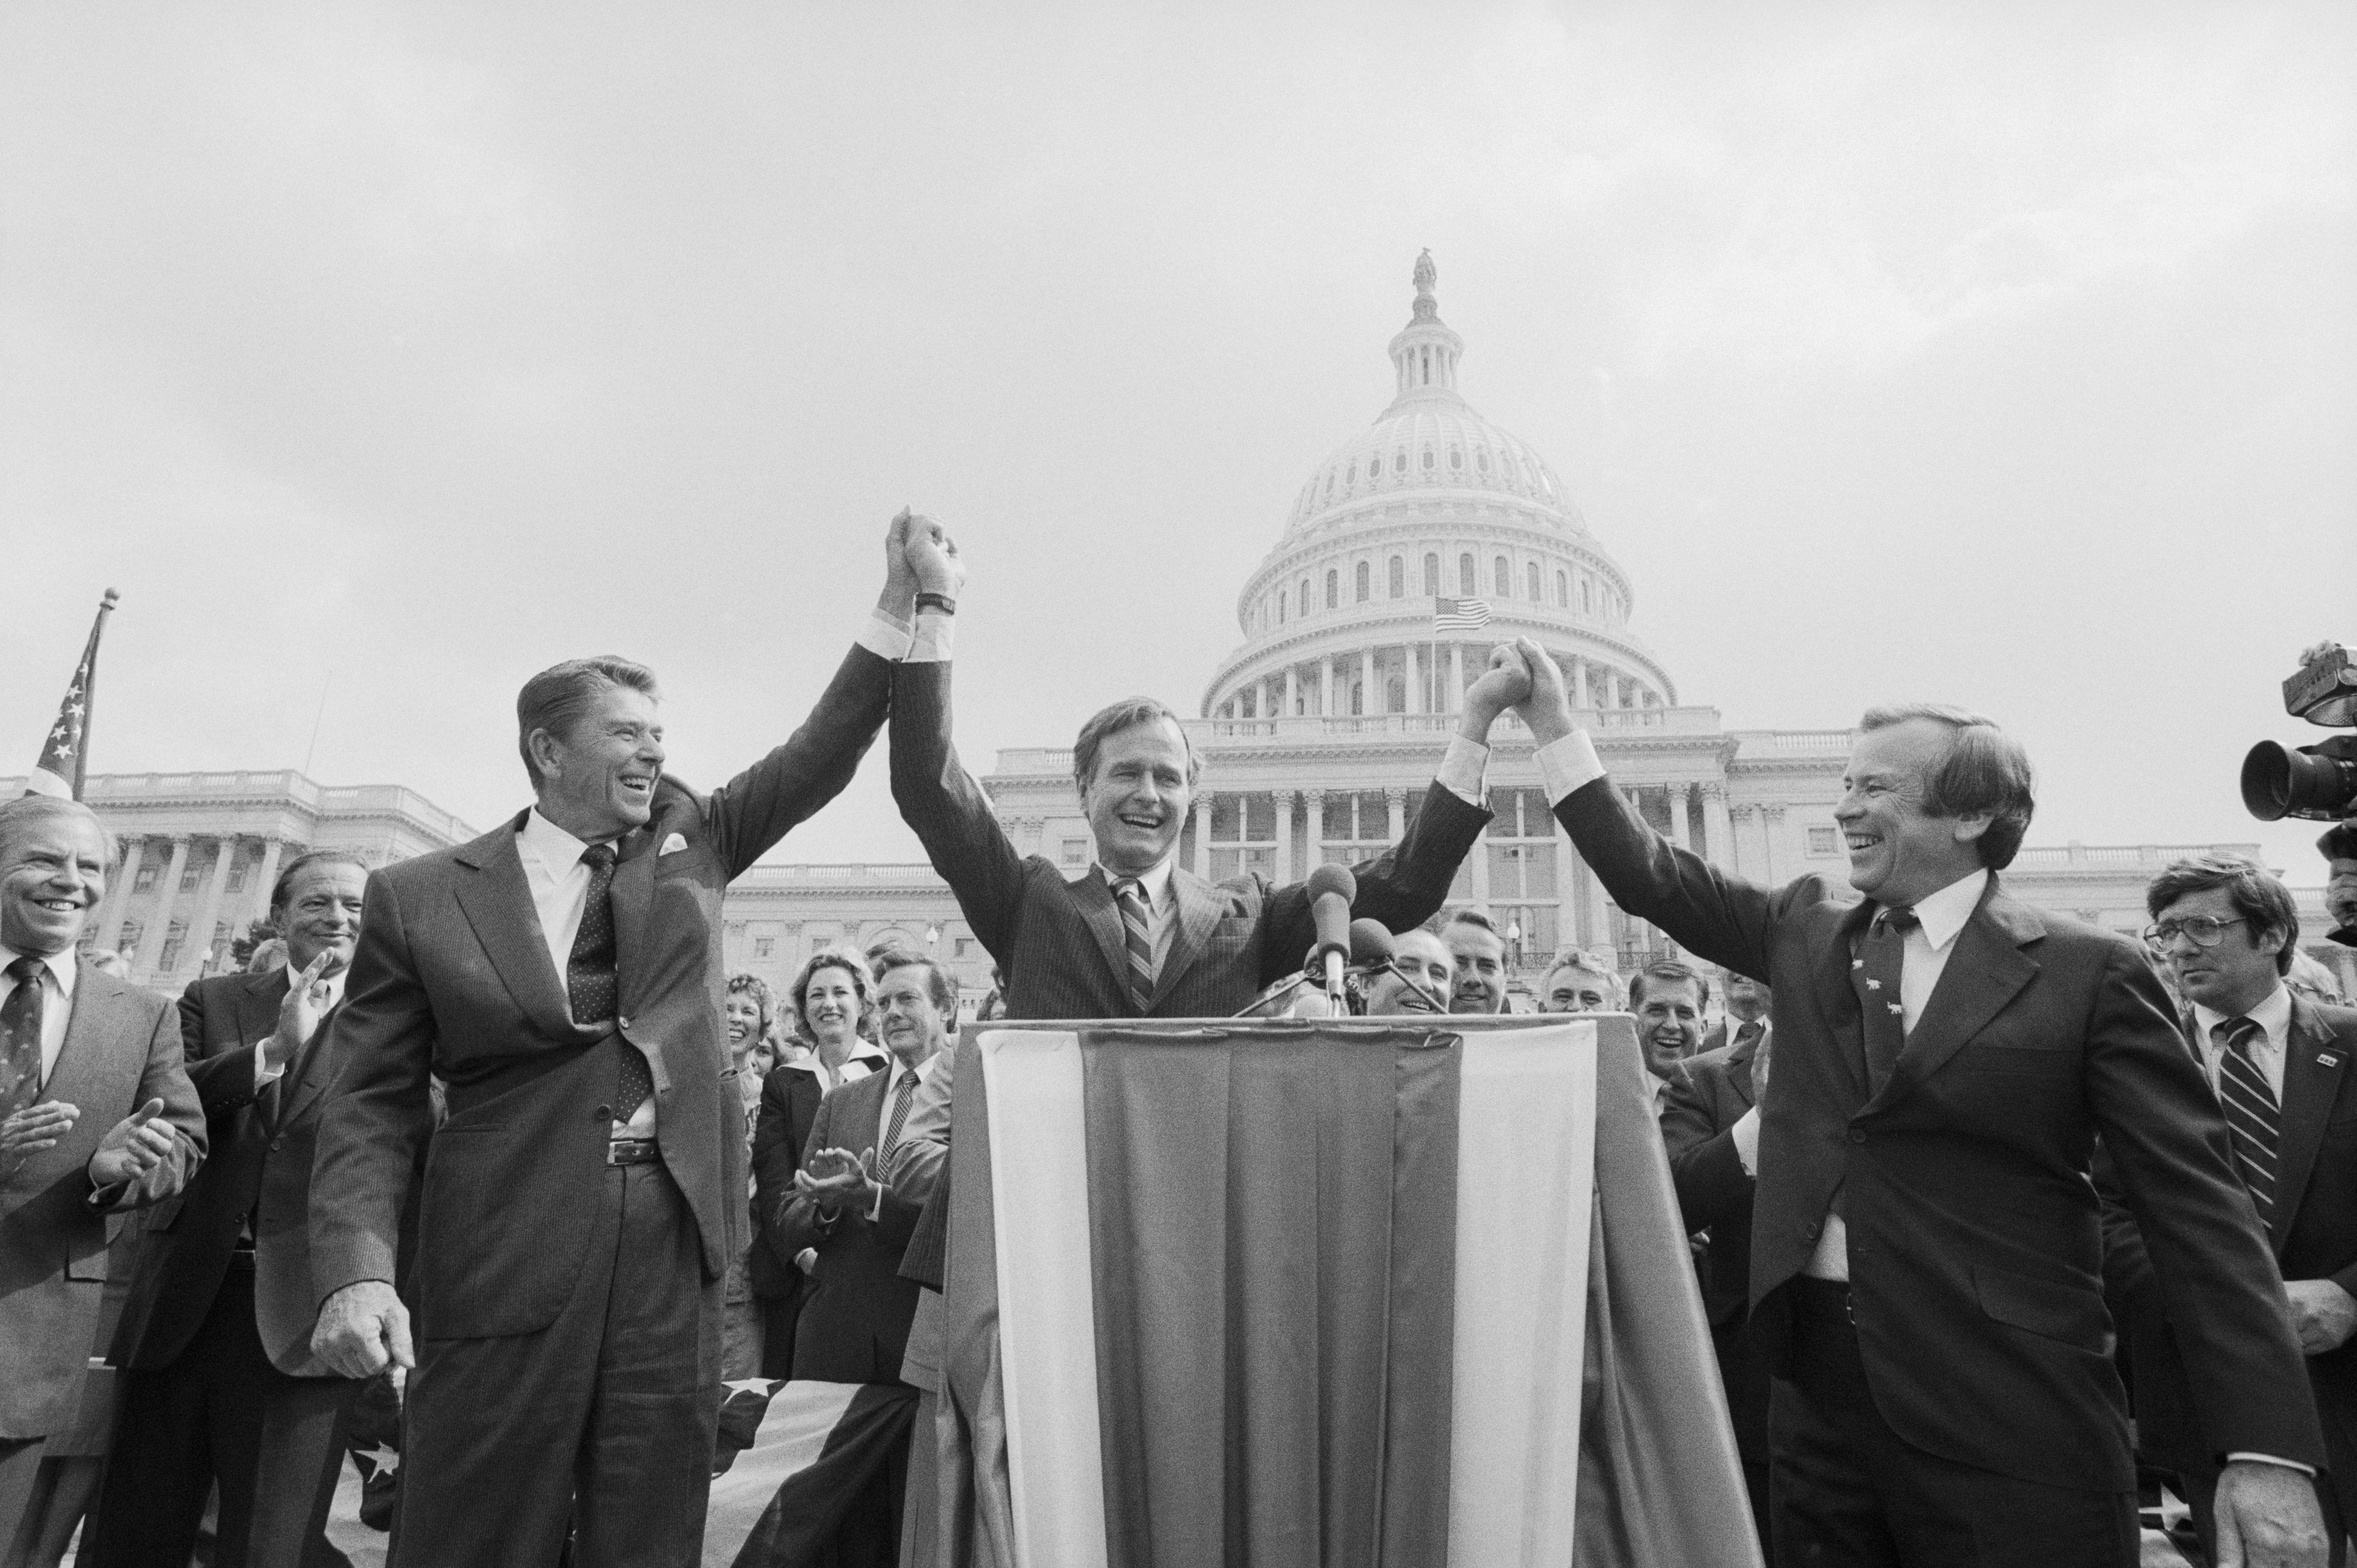 Reagan would prove to be the more popular conservative candidate in the race for the Presidency and would eventually gain the Republican nomination, but in a surprising turn of events, Reagan would pick Bush to be his vice presidential nominee. Here, the two candidates join Senate Majority leader Howard Baker for a rally on Capitol Hill in September 1980. (Ron Edmonds—Bettmann/Corbis)